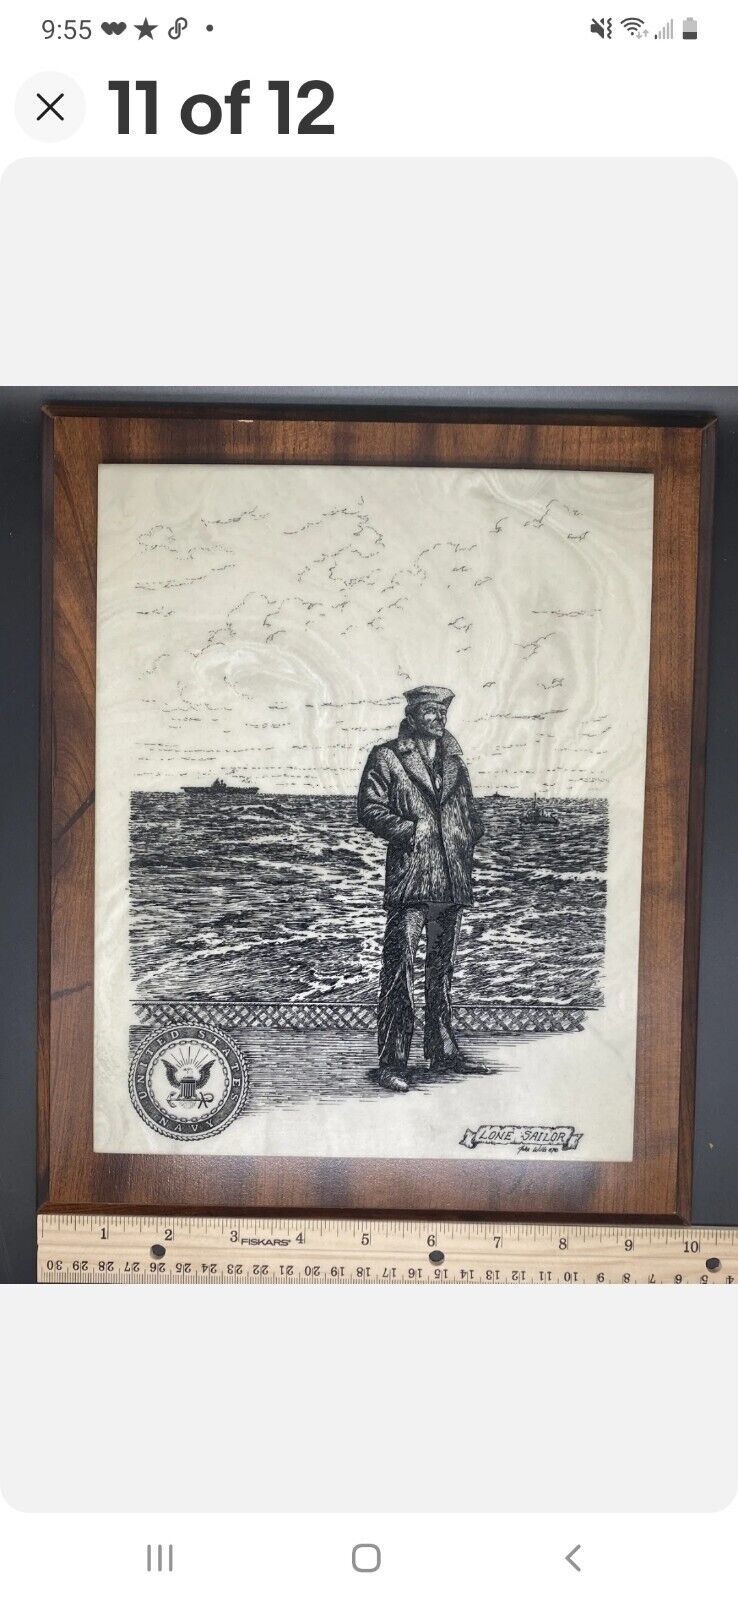 Vintage LONE SAILOR Etched Into Marble By John Wills, 1987